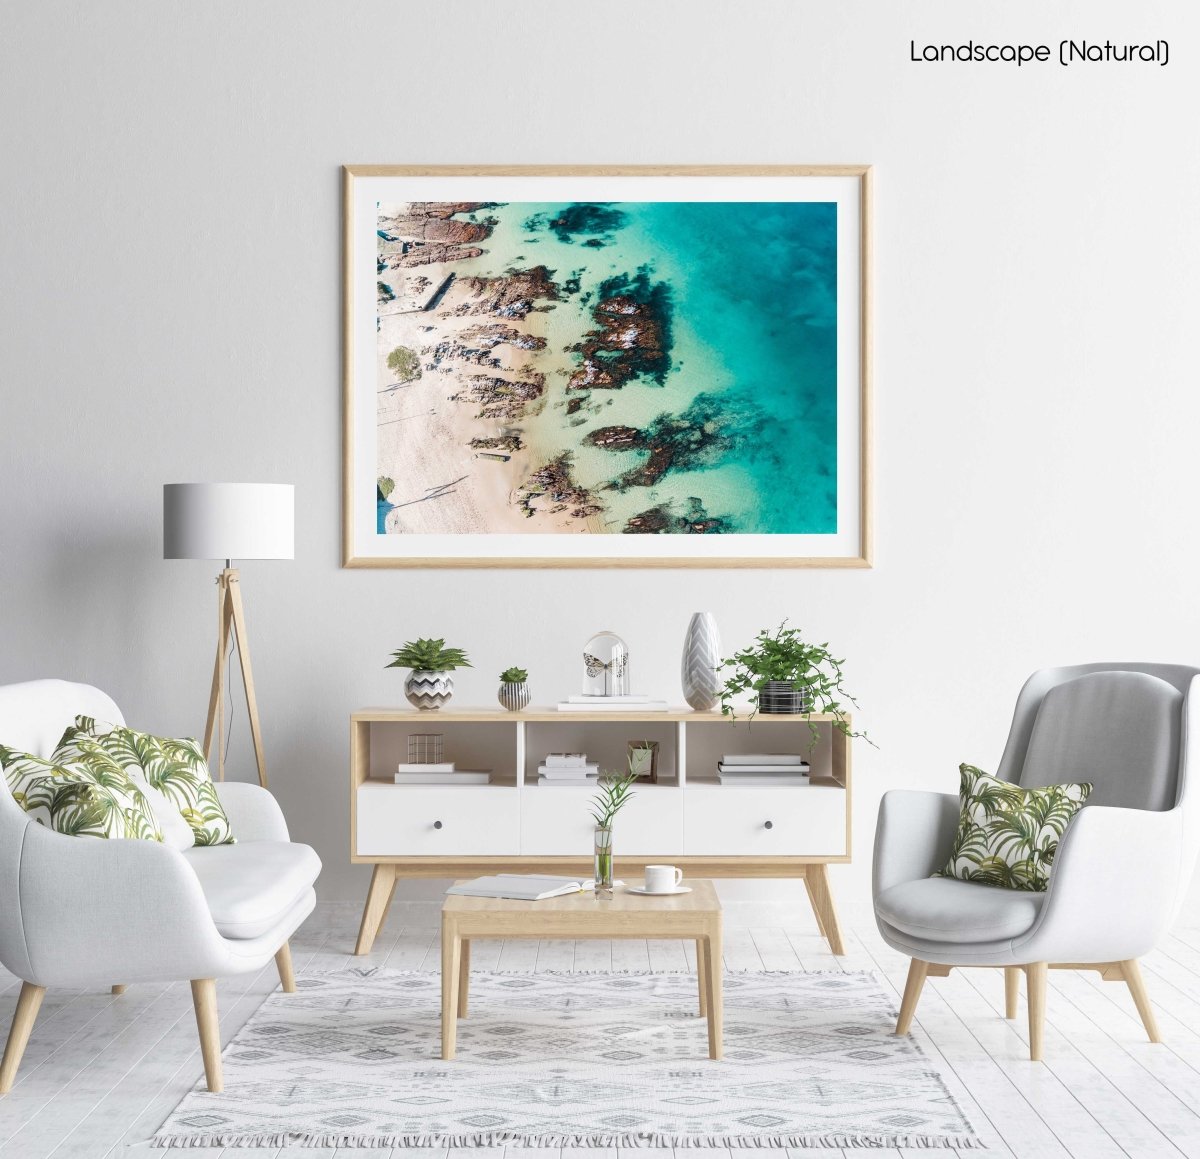 Bright turquoise blue water and rocks along Kalk Bays beach in a natural fine art frame